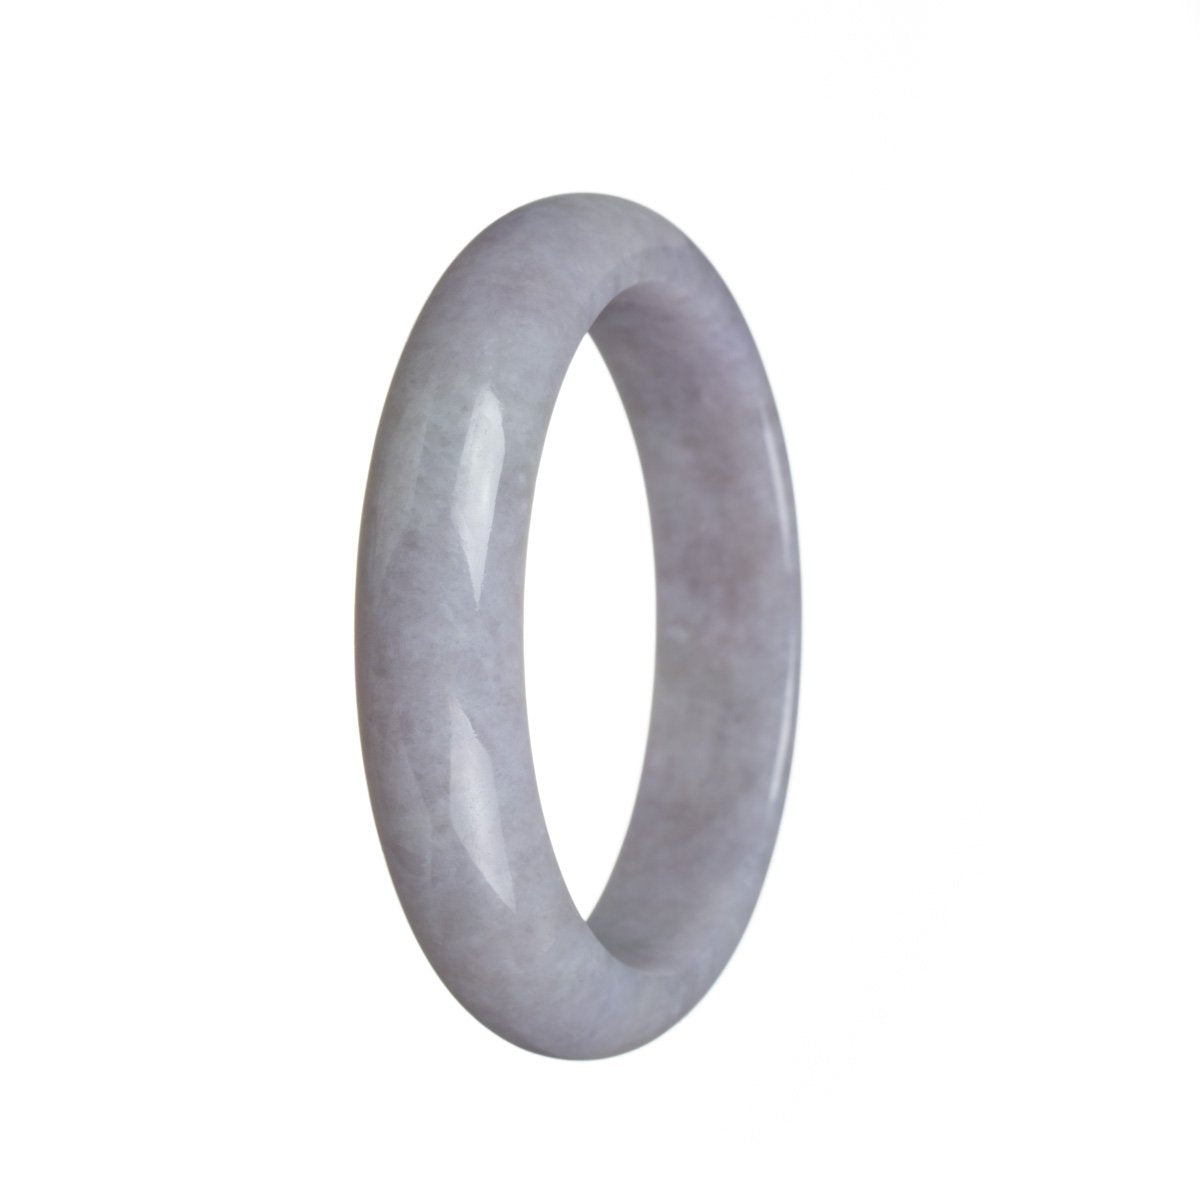 An elegant lavender jadeite jade bangle bracelet, featuring a half-moon shape, graded as A quality. Perfect for adding a touch of sophistication to any outfit.